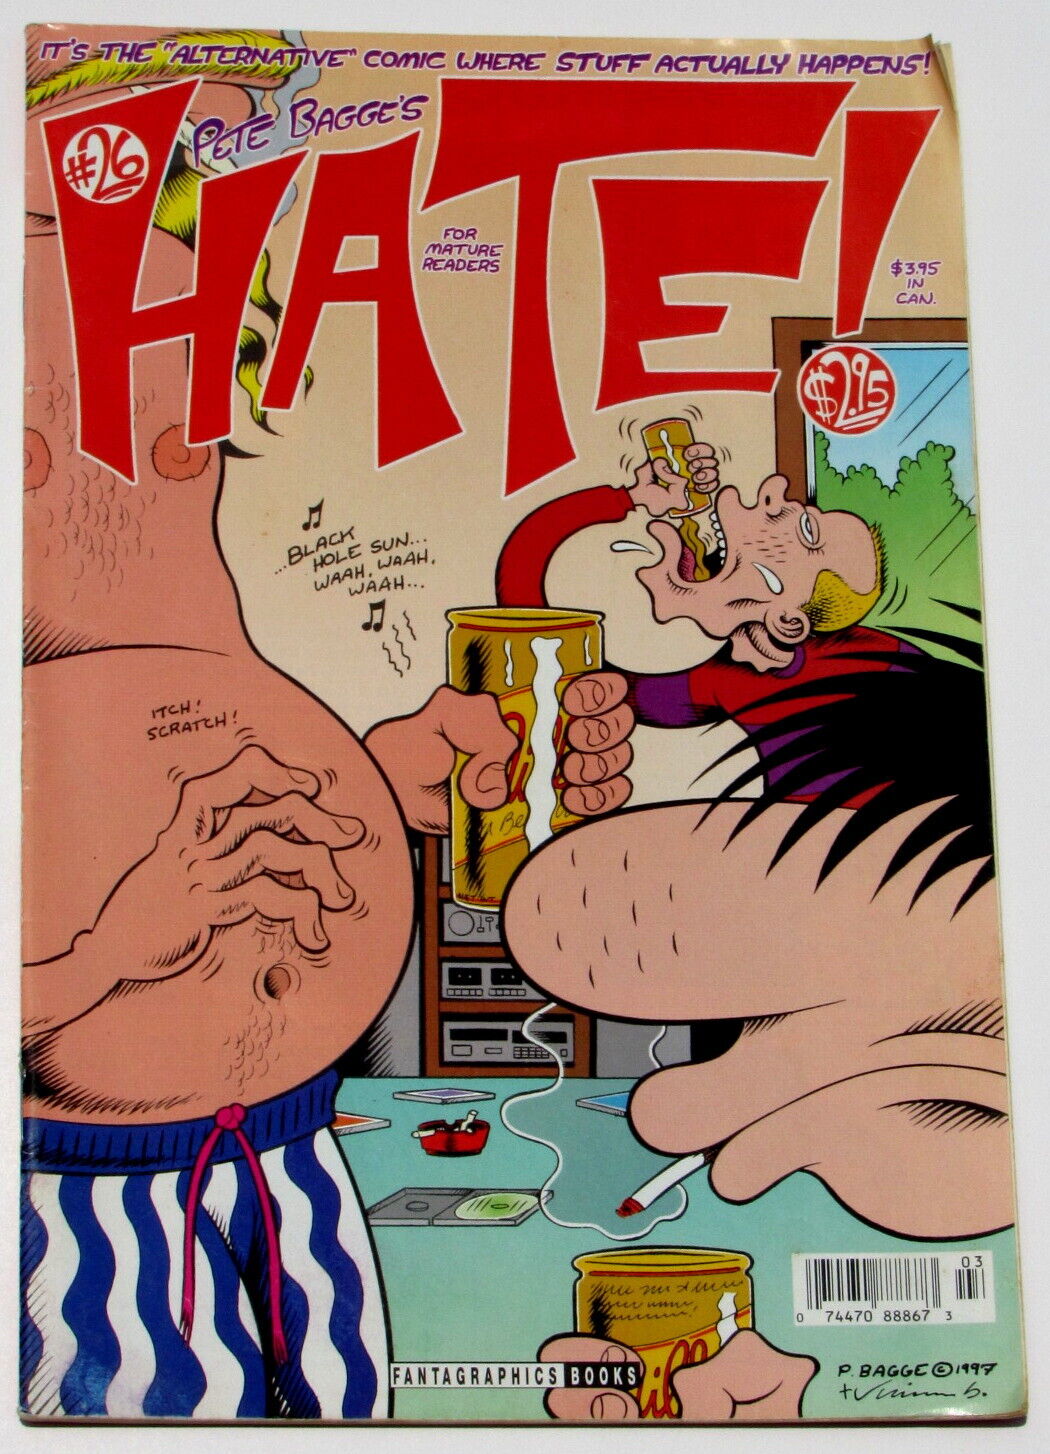 HATE #26 Peter Bagge FANTAGRAPHICS BOOKS Good Condition Buddy, Jay, Stnky 1997